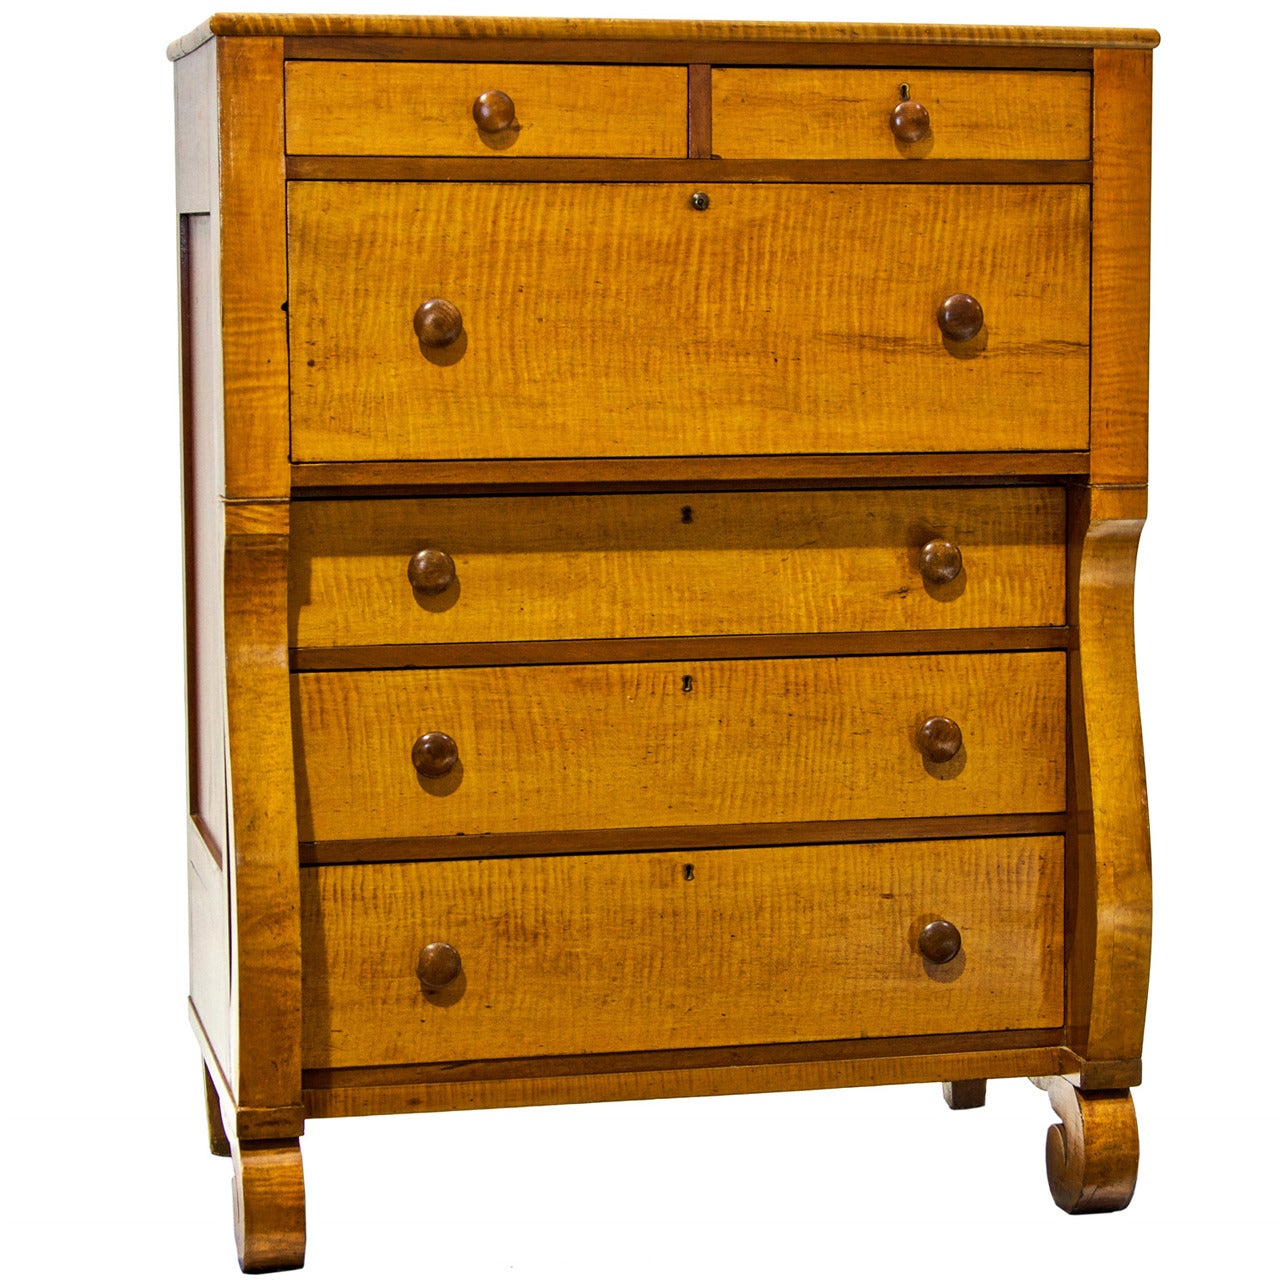 Early 19th Century American Empire Chest with Secretaire Drawer